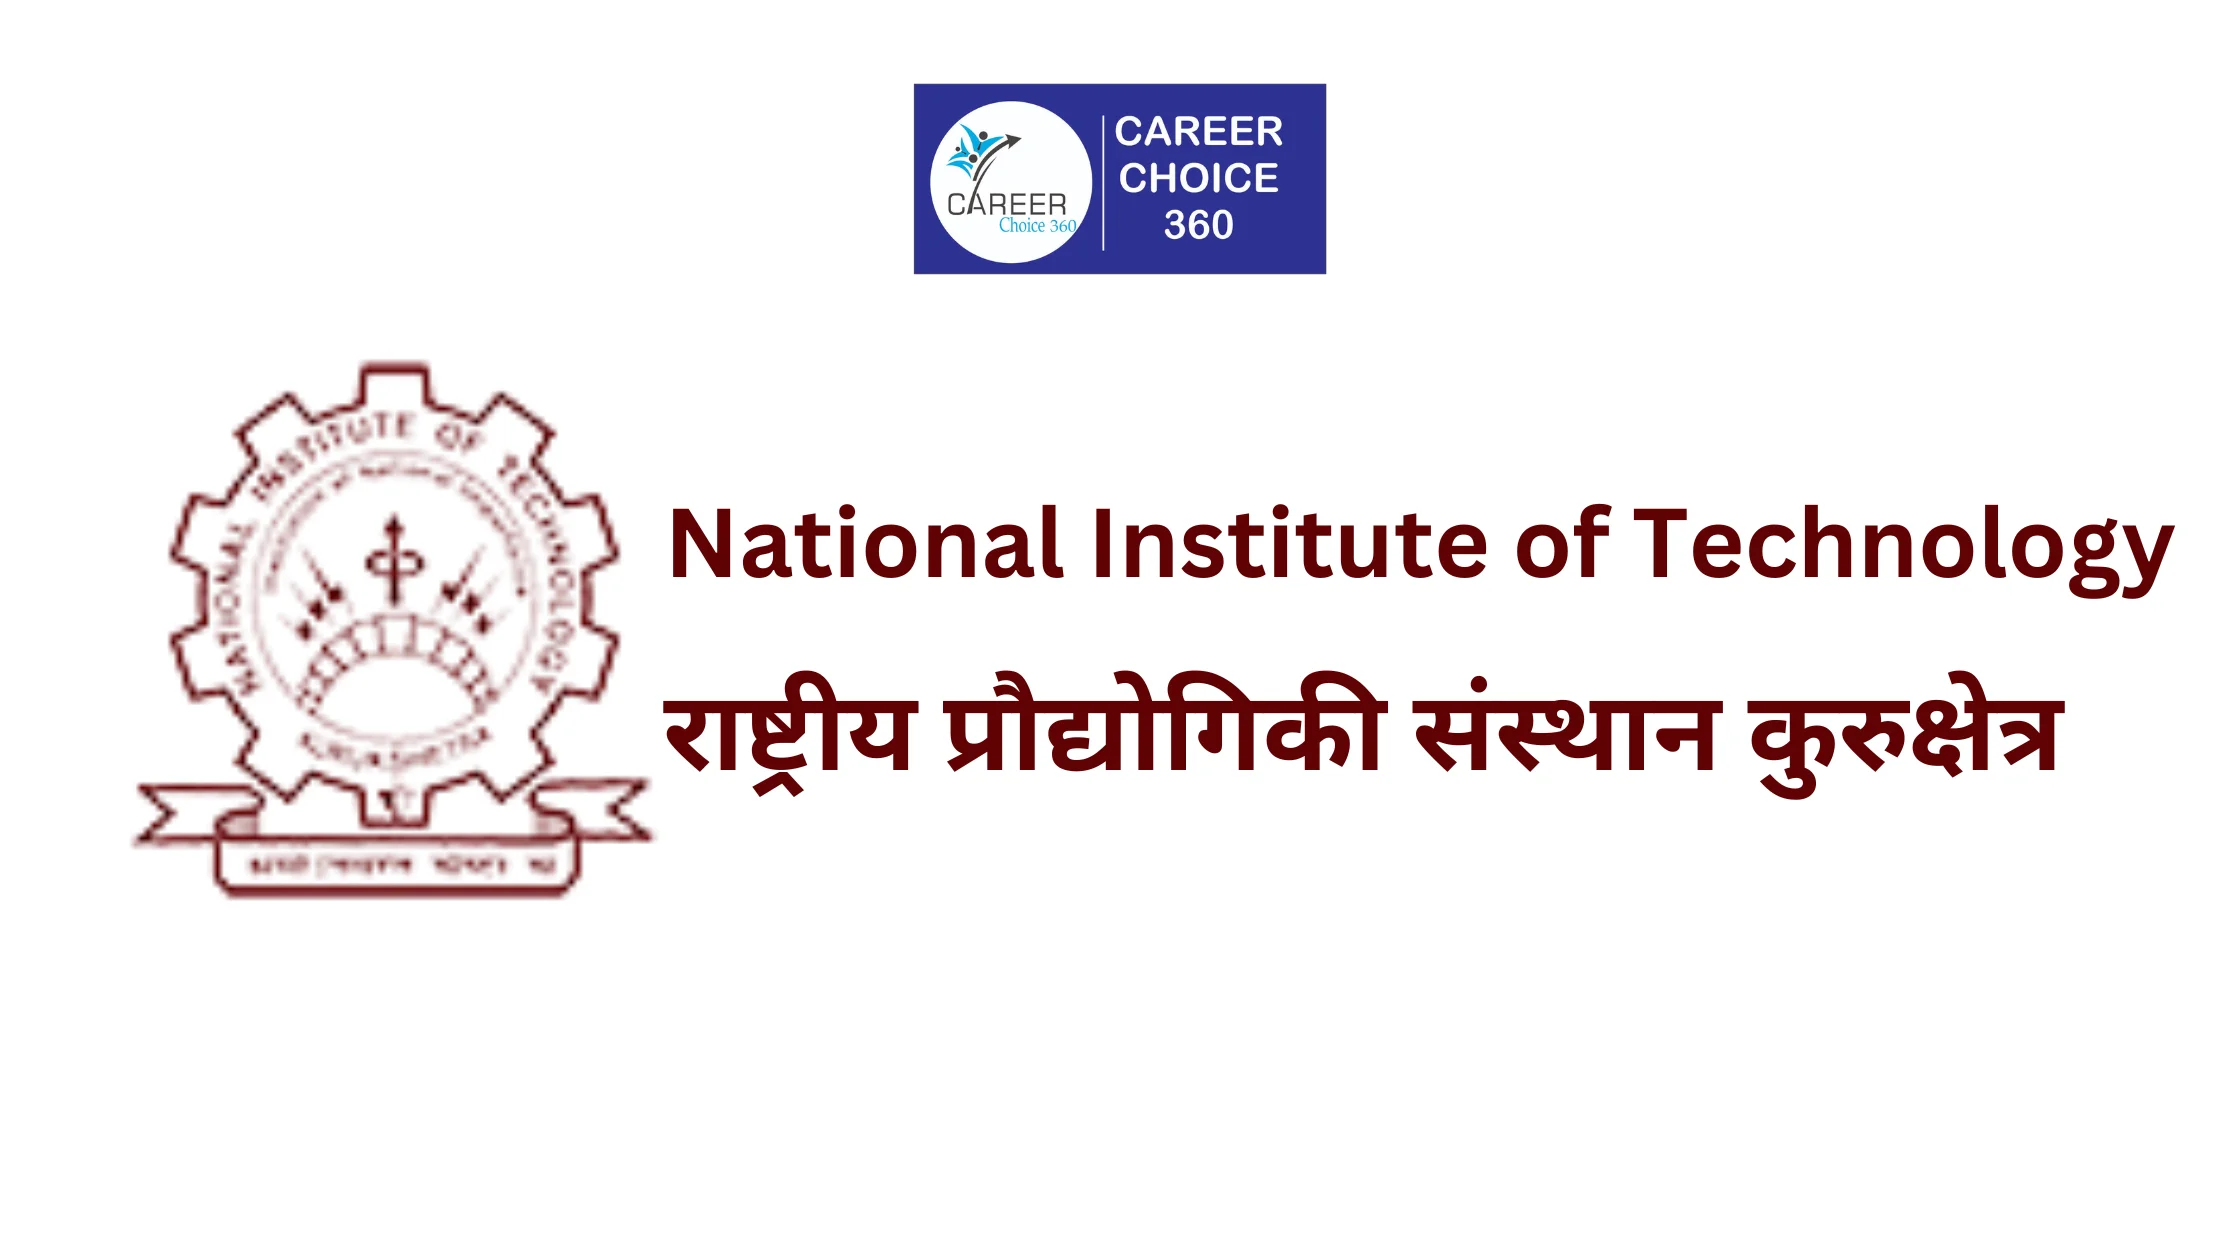 You are currently viewing NIT Kurukshetra : Highlights, Courses and Fees, Cutoff, Admission, Placements, Fees, Ranking